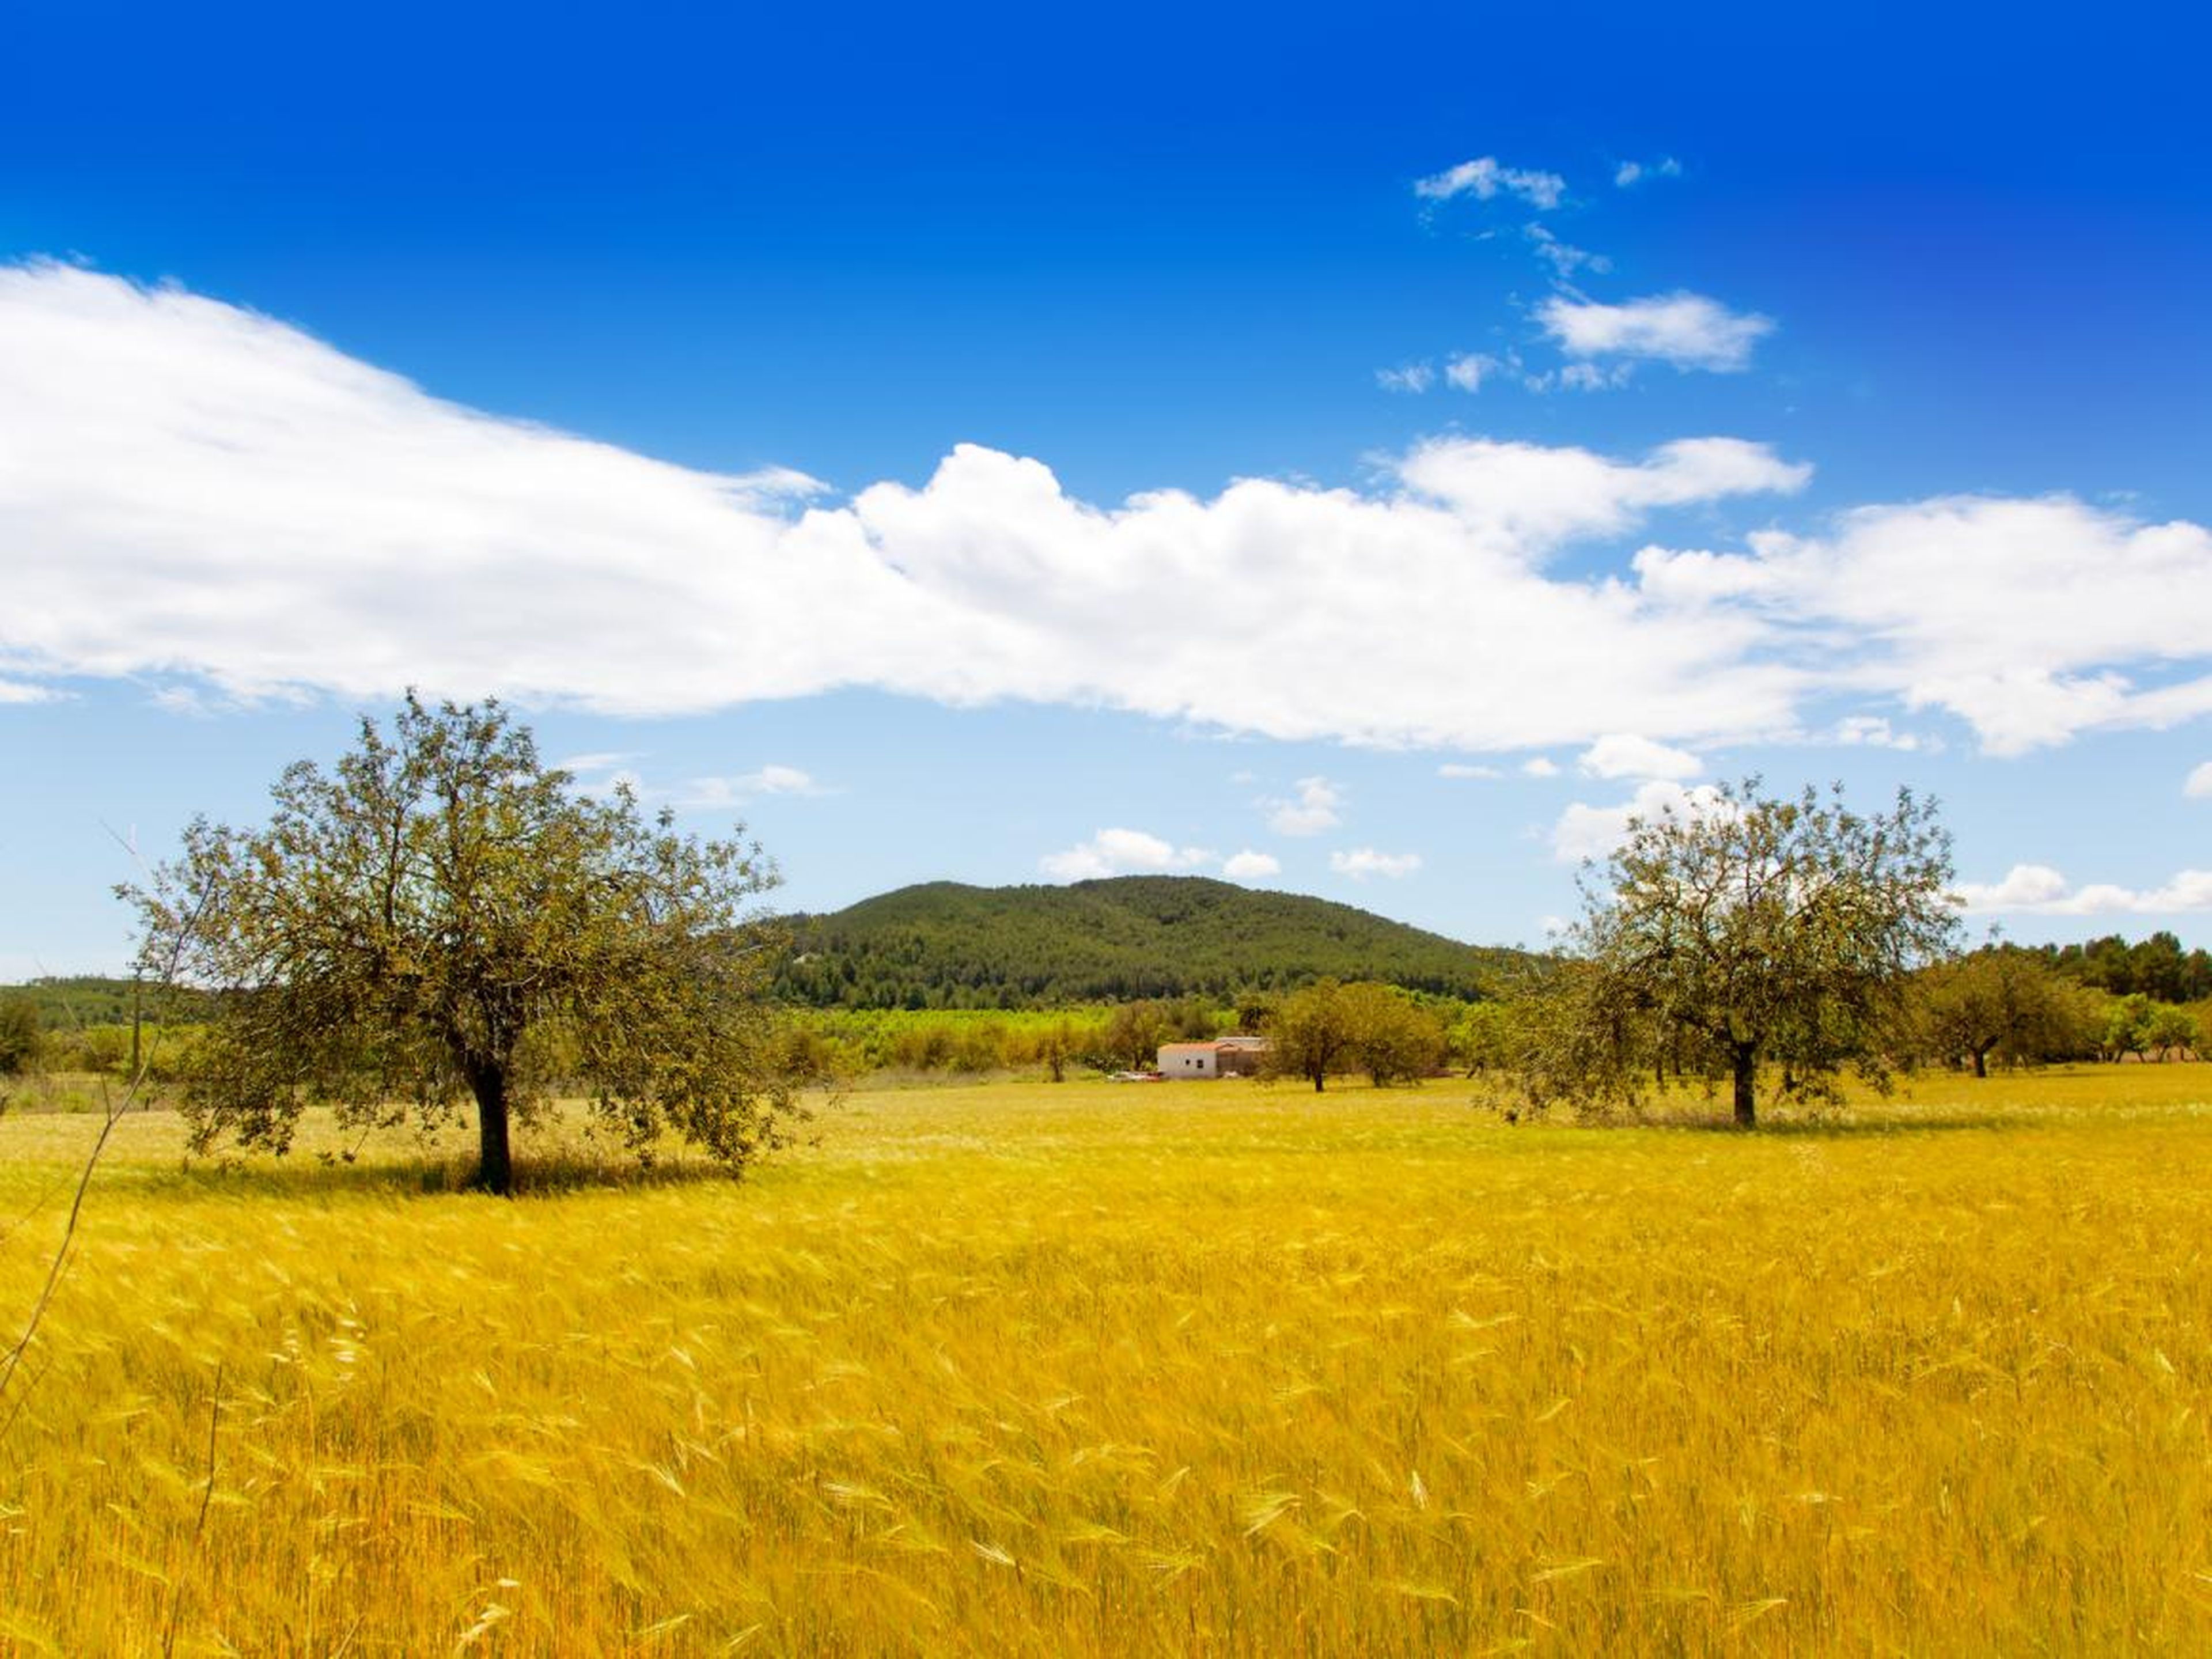 There's a stunning variety of things to see in Ibiza. Once you head away from the main towns to the island's north, you'll find a vast, green countryside.